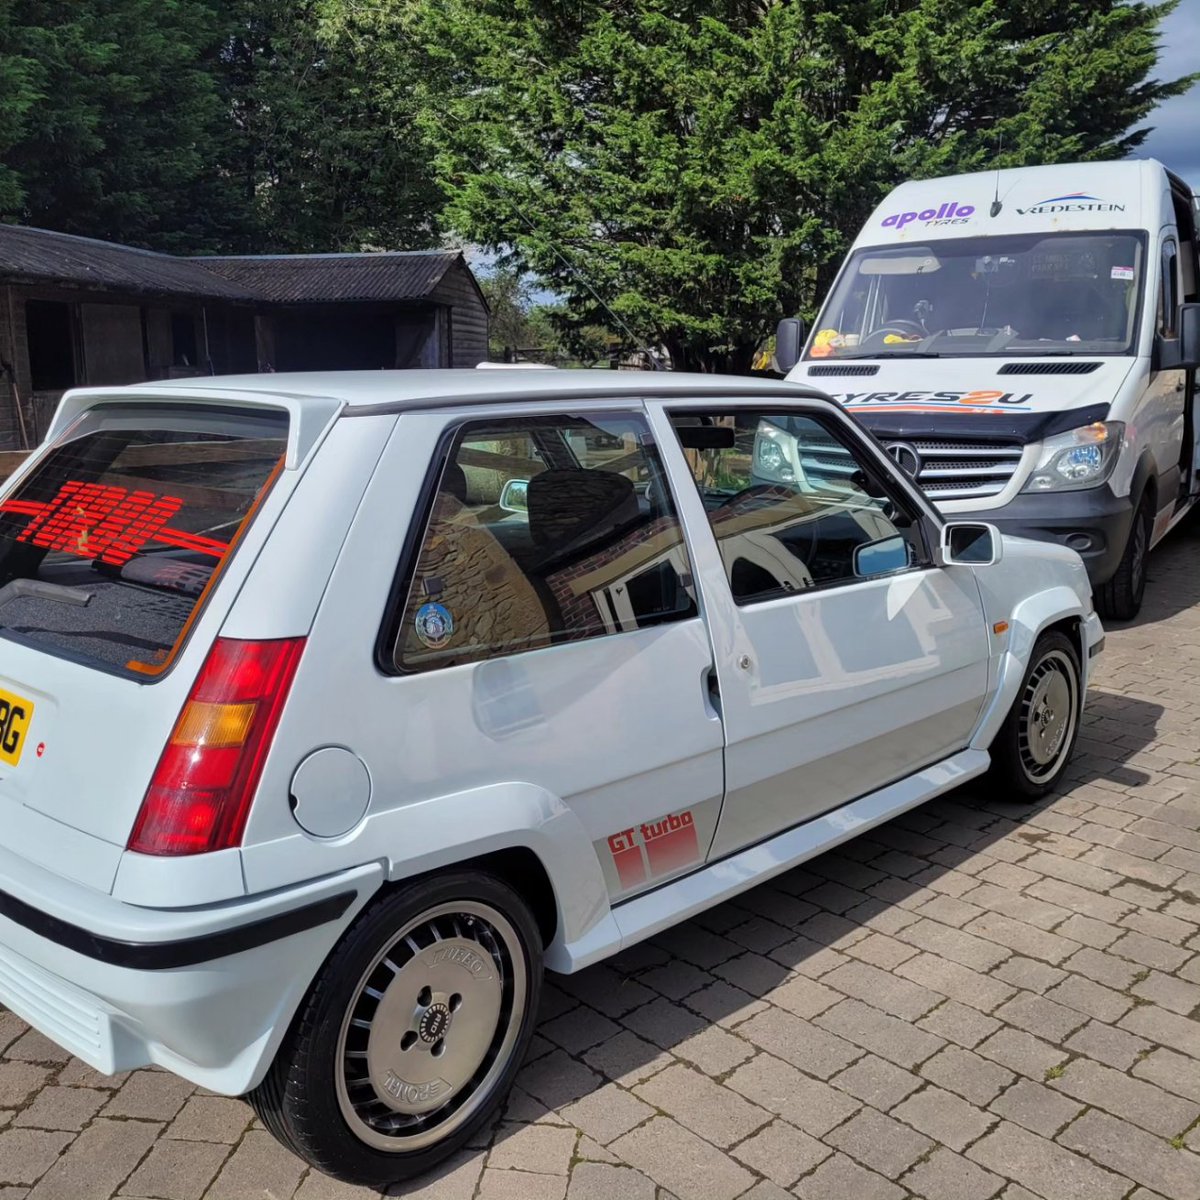 What a clean Renault 5 Gtturbo today getting 4 new Goodyear GSD3 now bags more grip (feedback from customer) if you would like me to sort your tyres changemytyres.co.uk